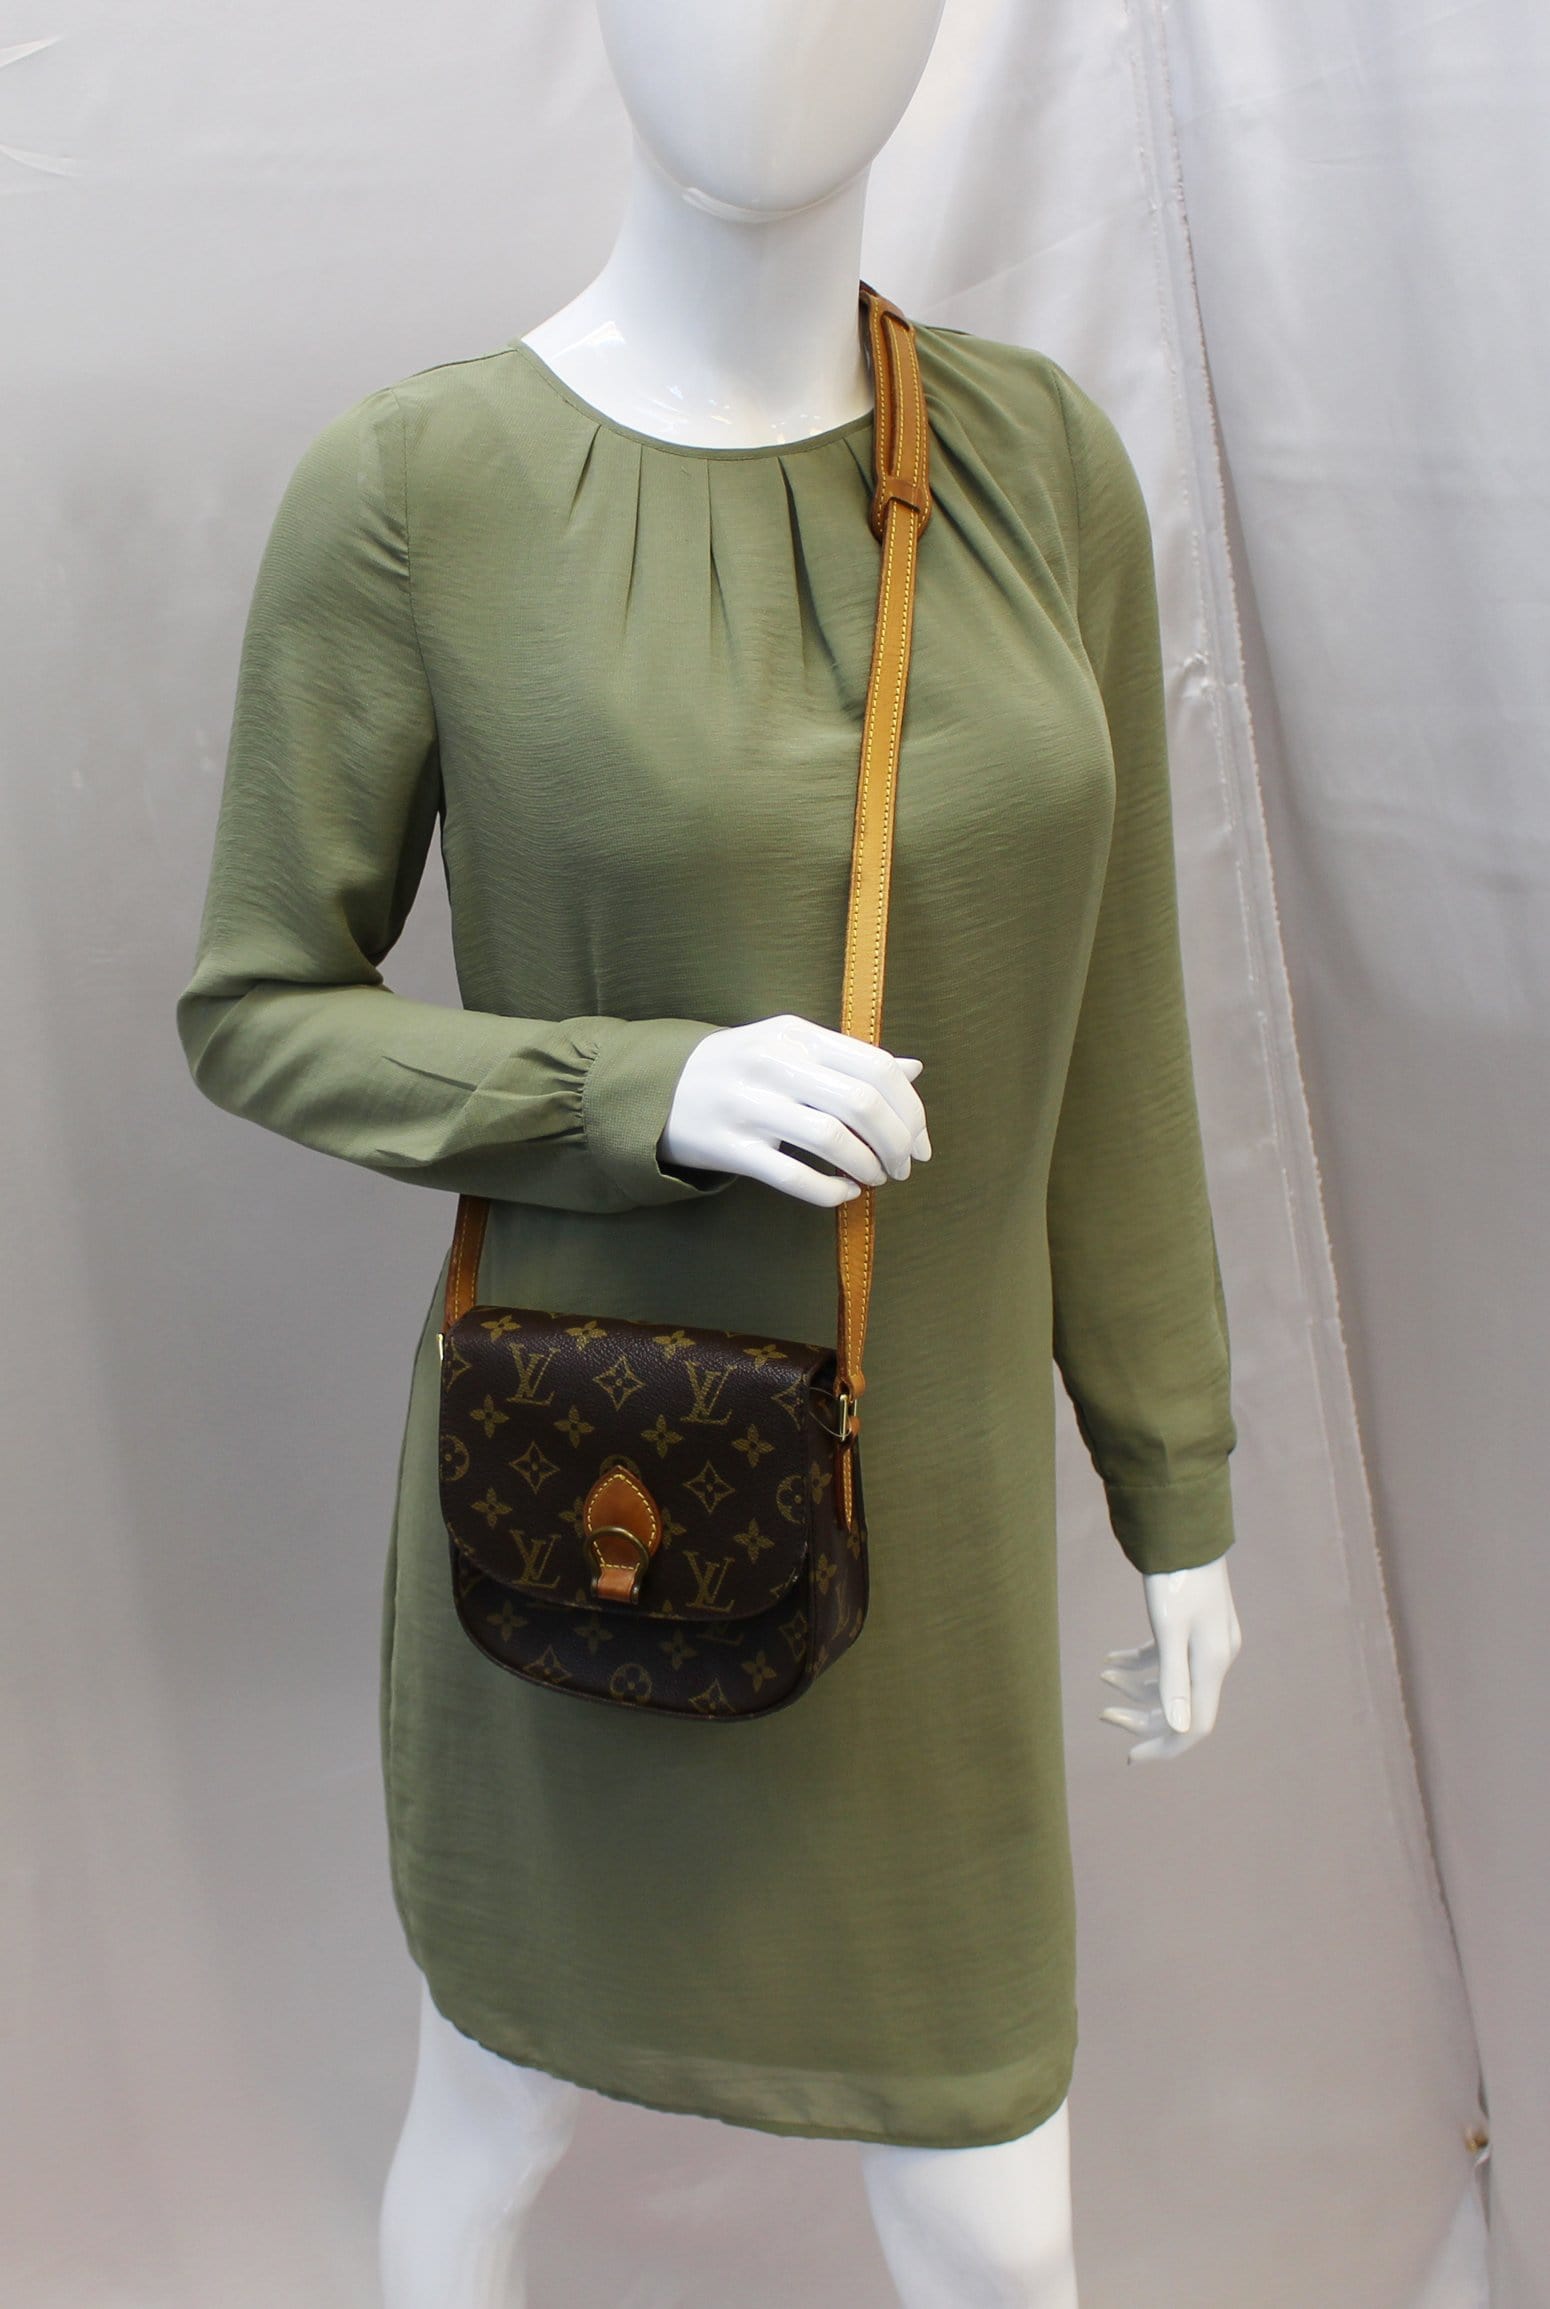 gently used Louis Vuitton purse - clothing & accessories - by